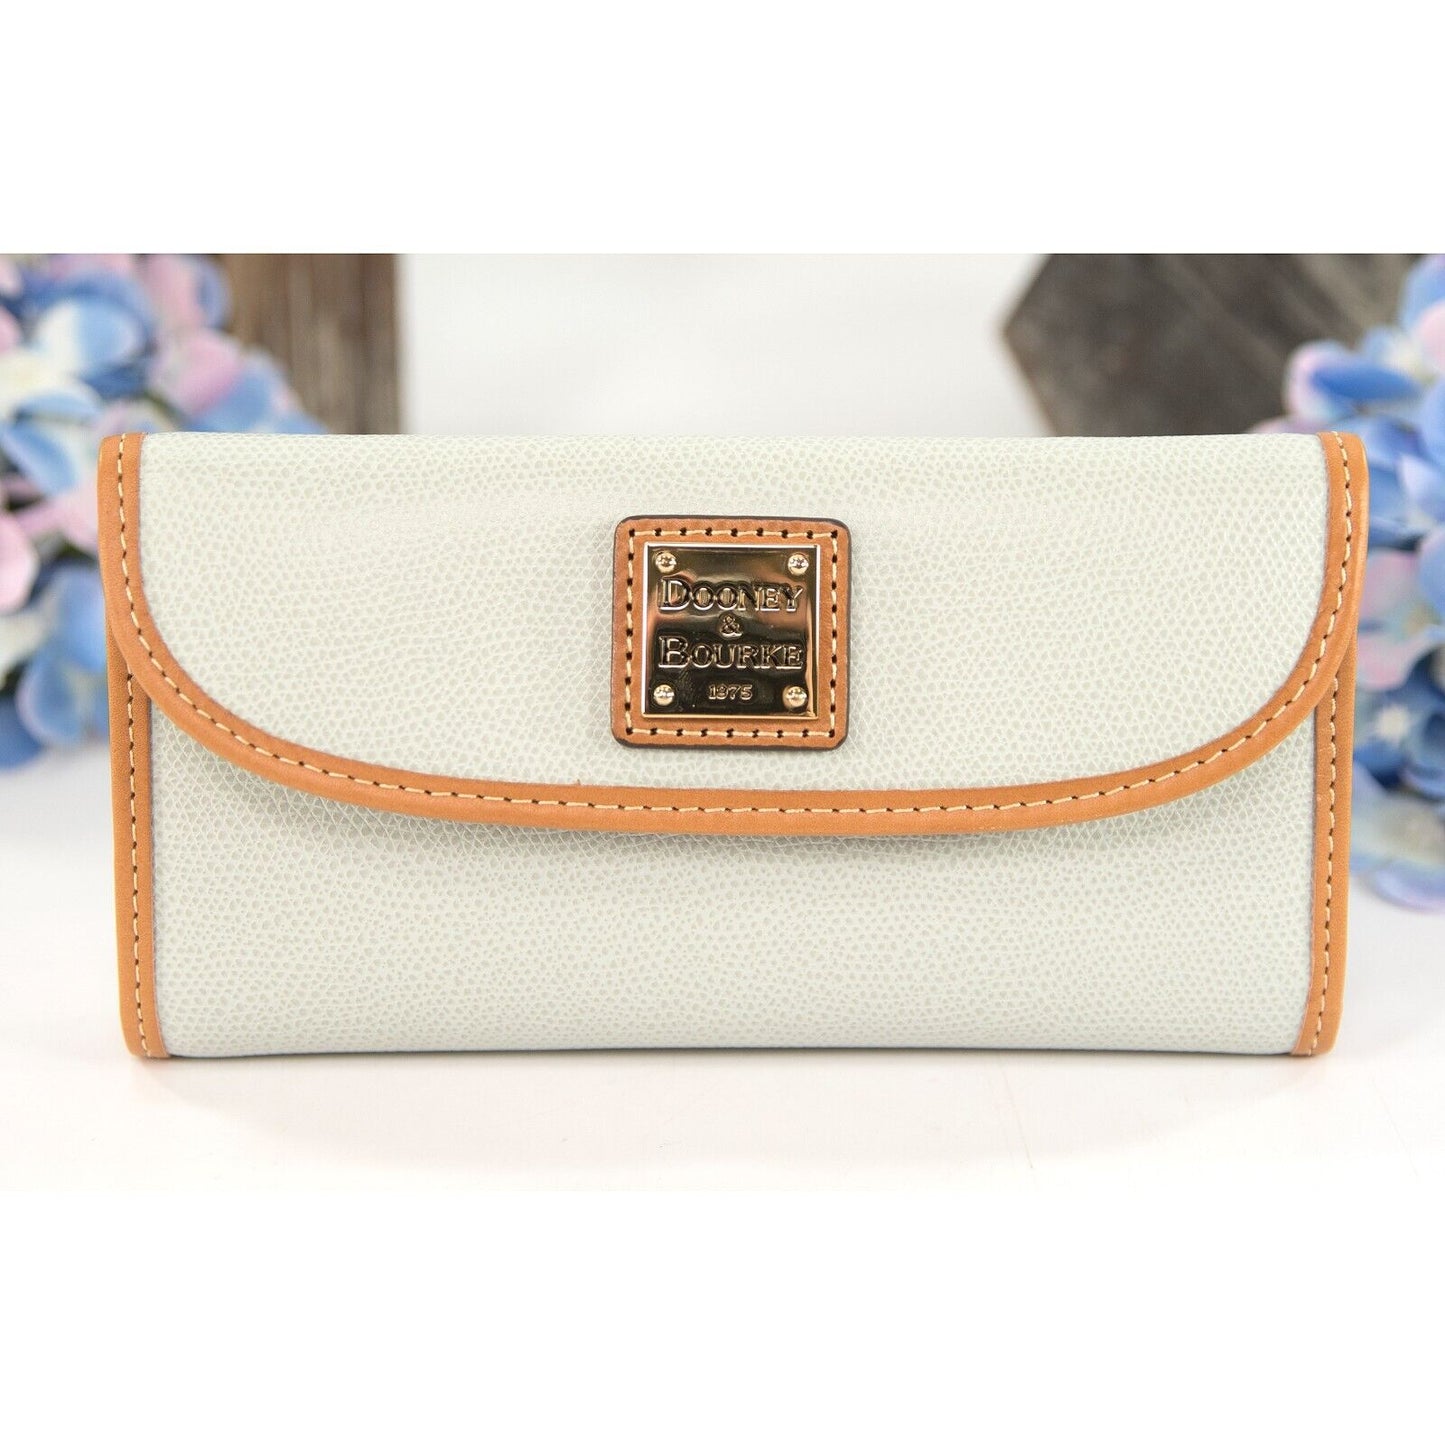 Dooney & Bourke Claremont Ice Blue and Natural Leather Trifold Wallet NWT